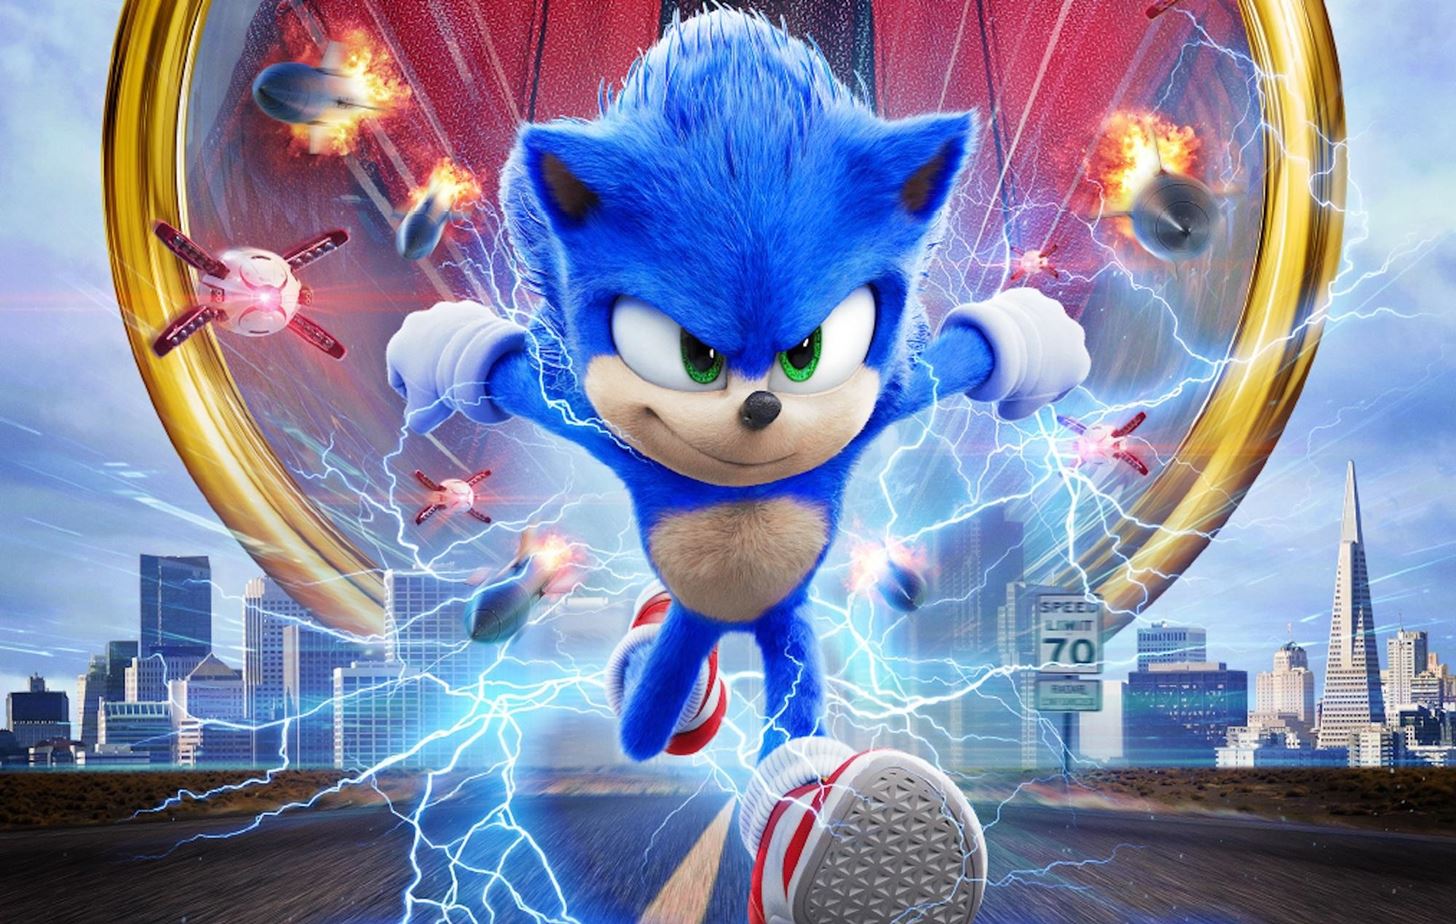 Download Sonic the Hedgehog (2020) Full Movie FREE